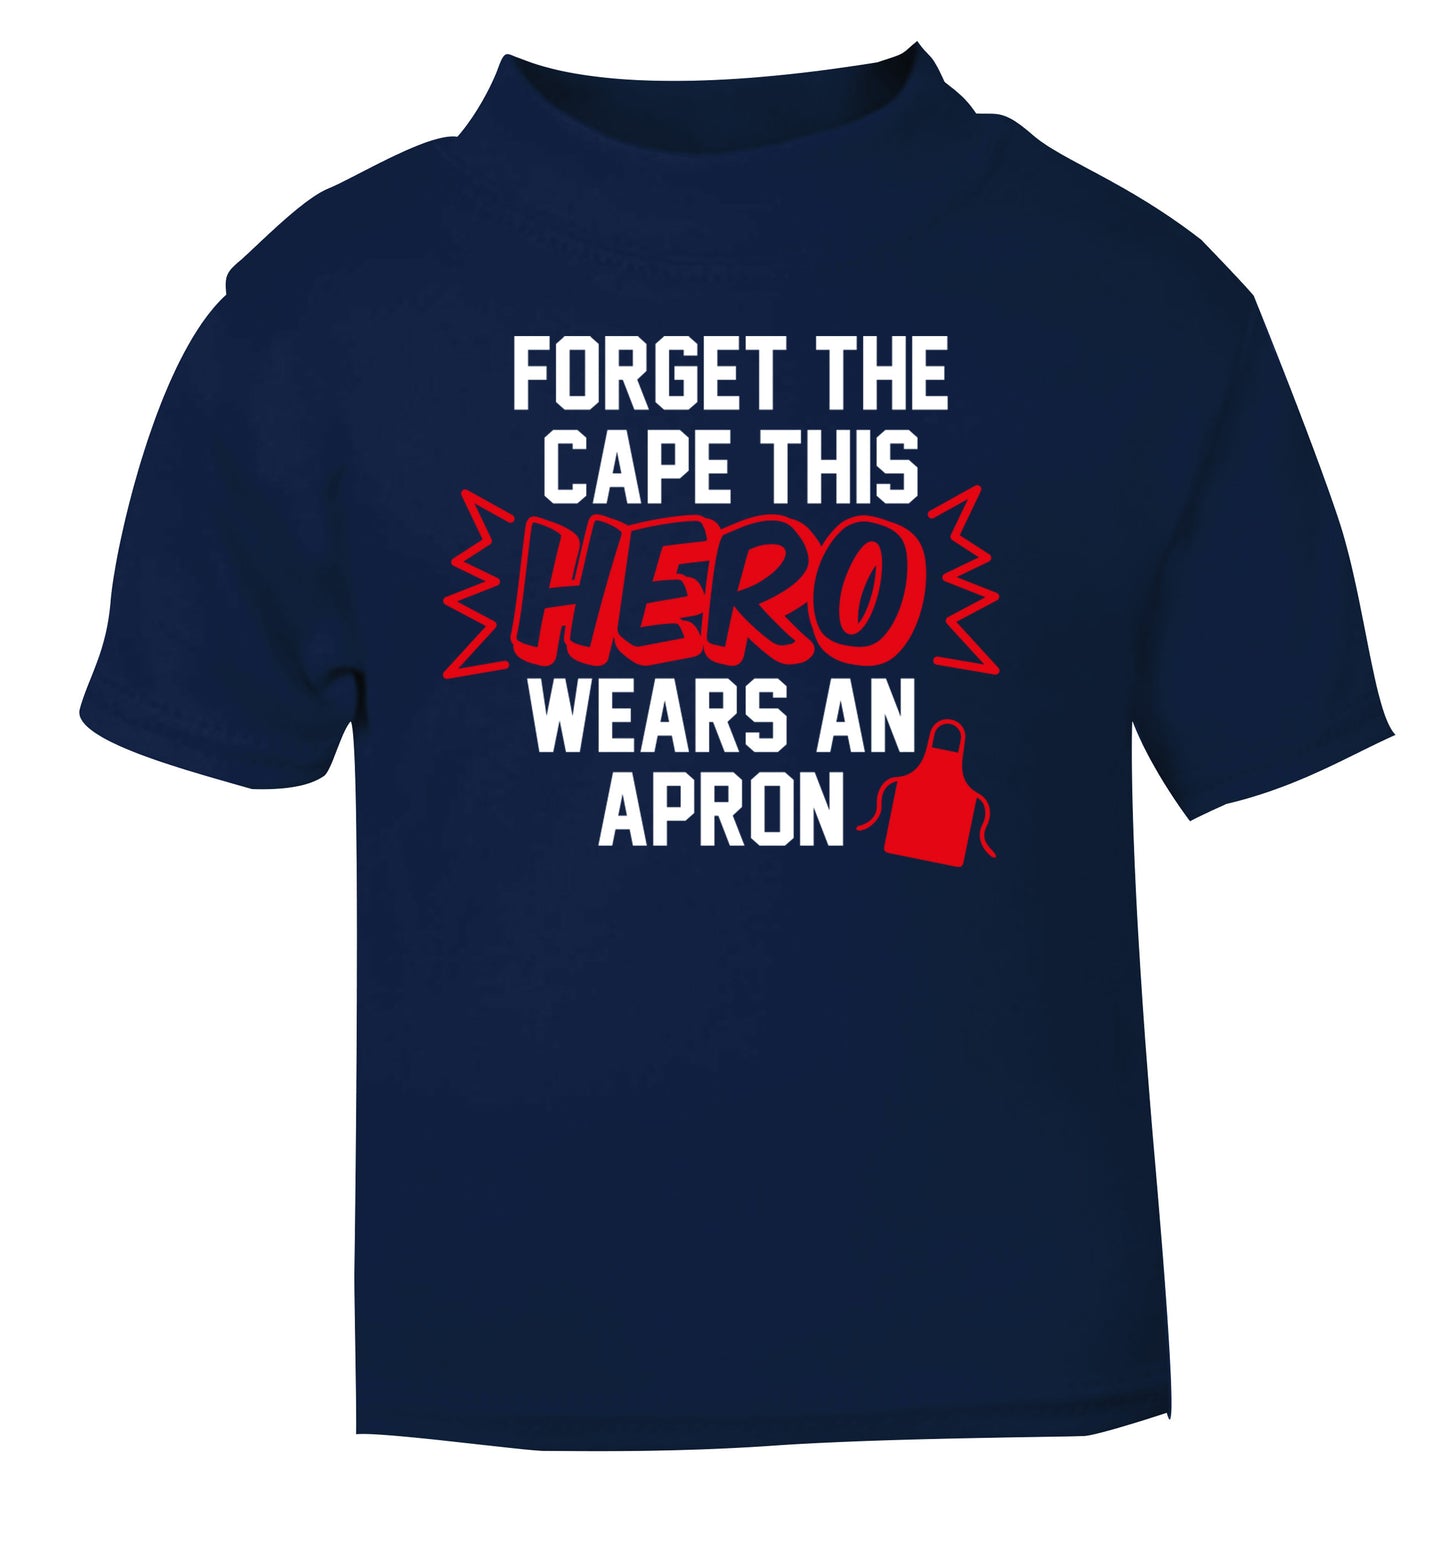 Forget the cape this hero wears an apron navy Baby Toddler Tshirt 2 Years